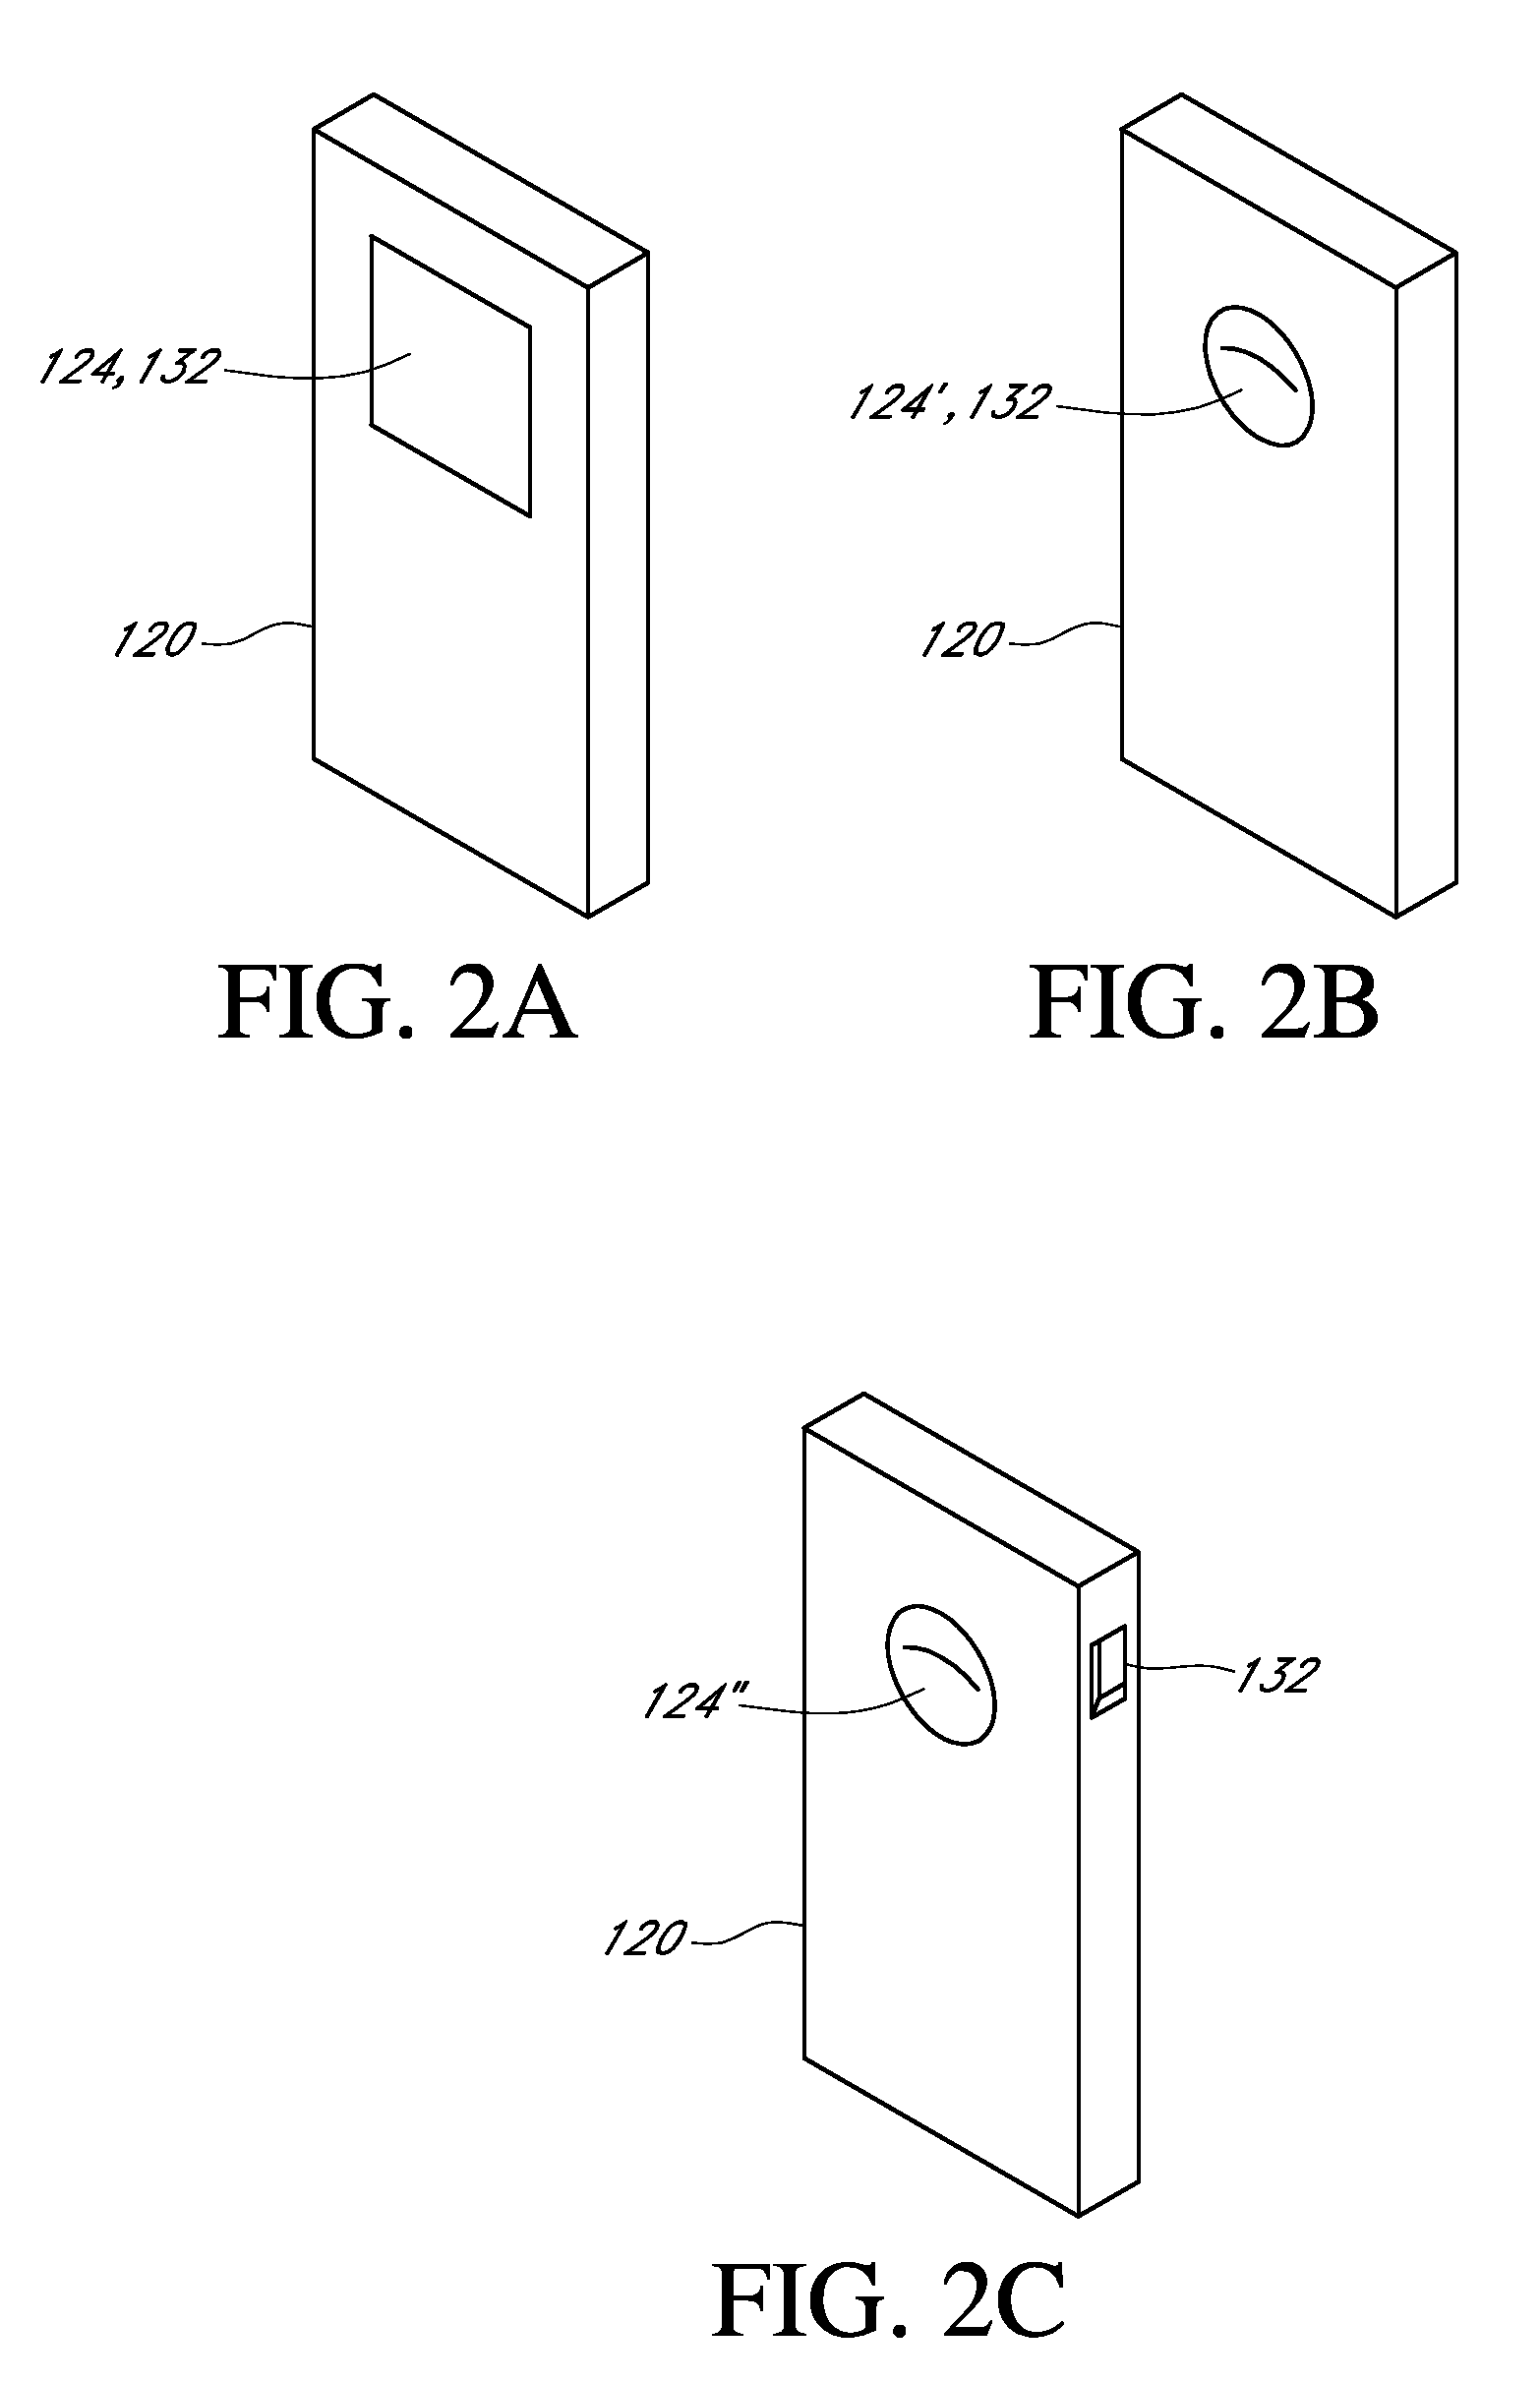 Multi-resolution pointing system